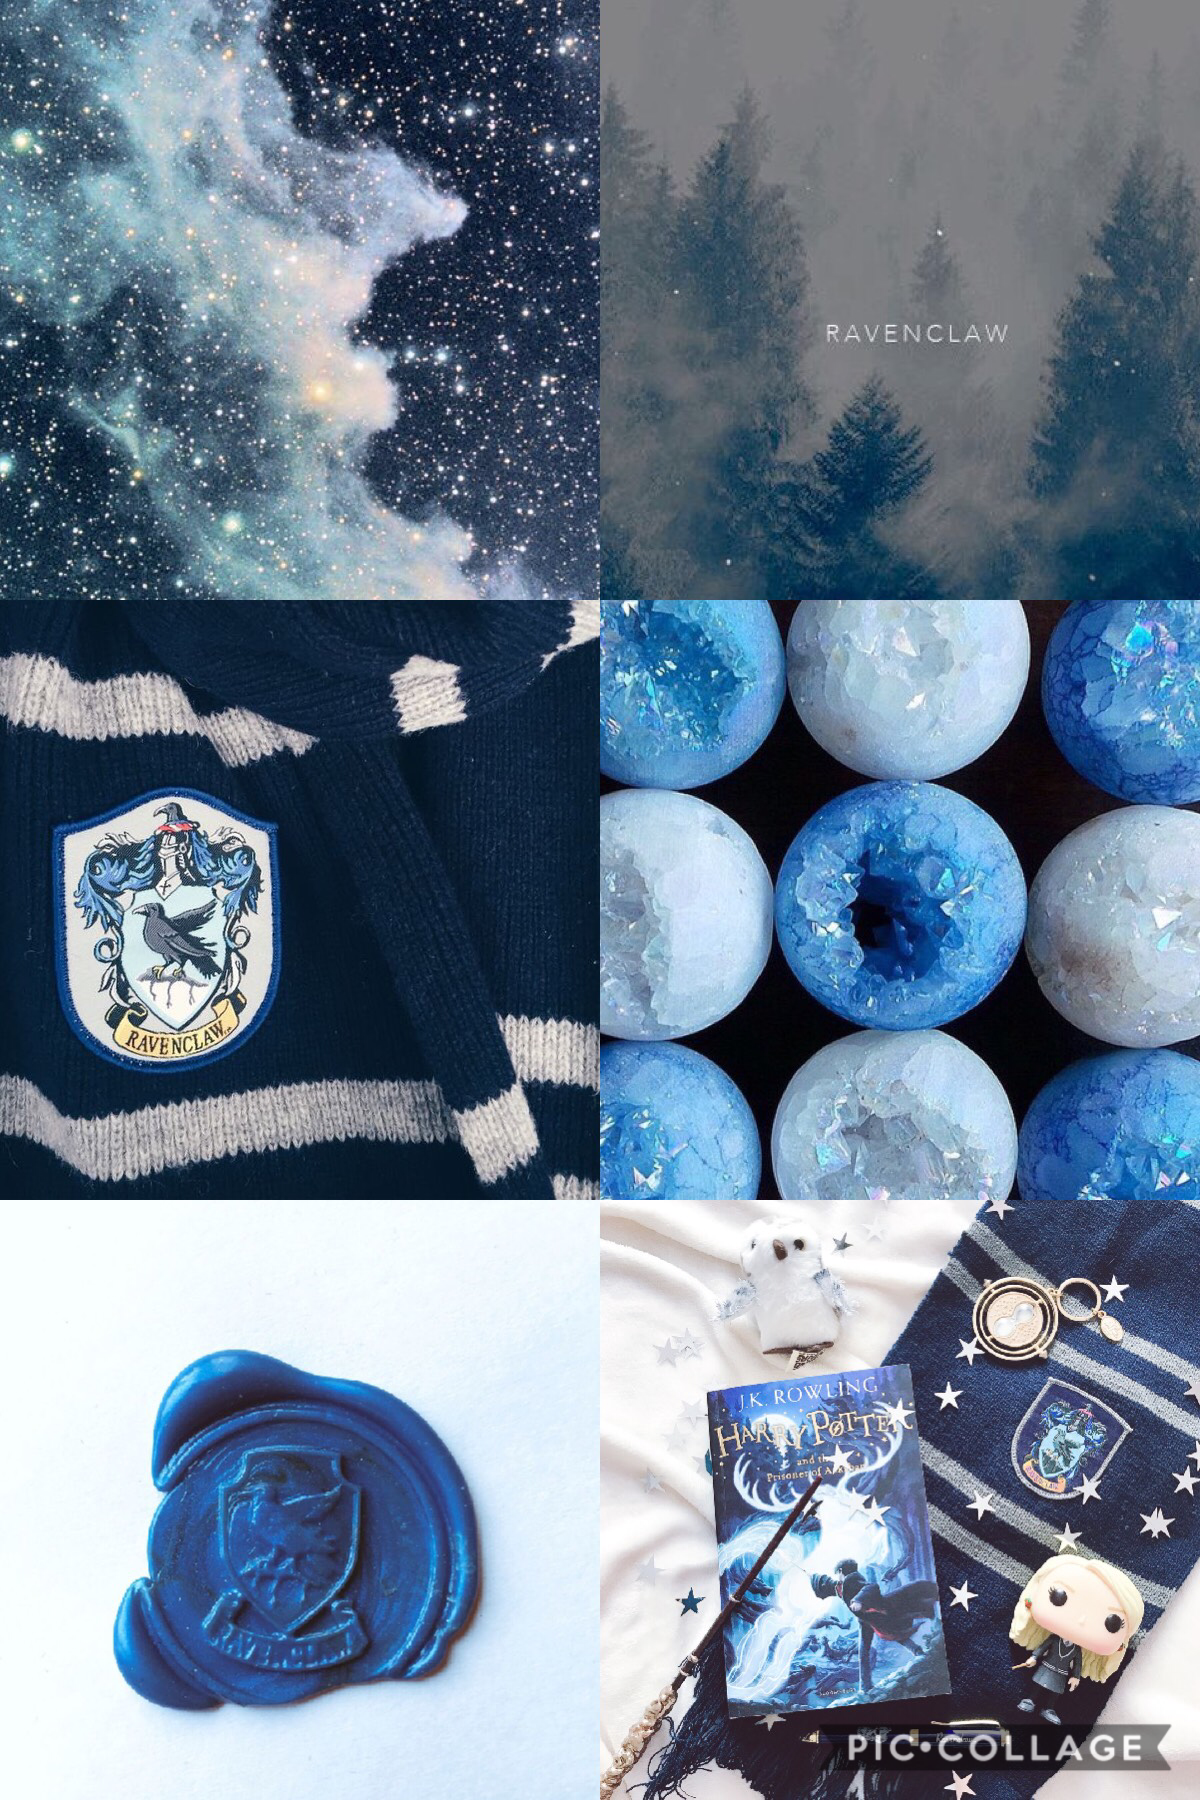 💙tap💙
•special thanks to the people who actually read all the remixes in the last post•

Qotd: house?
Aotd: hufflepuff💛